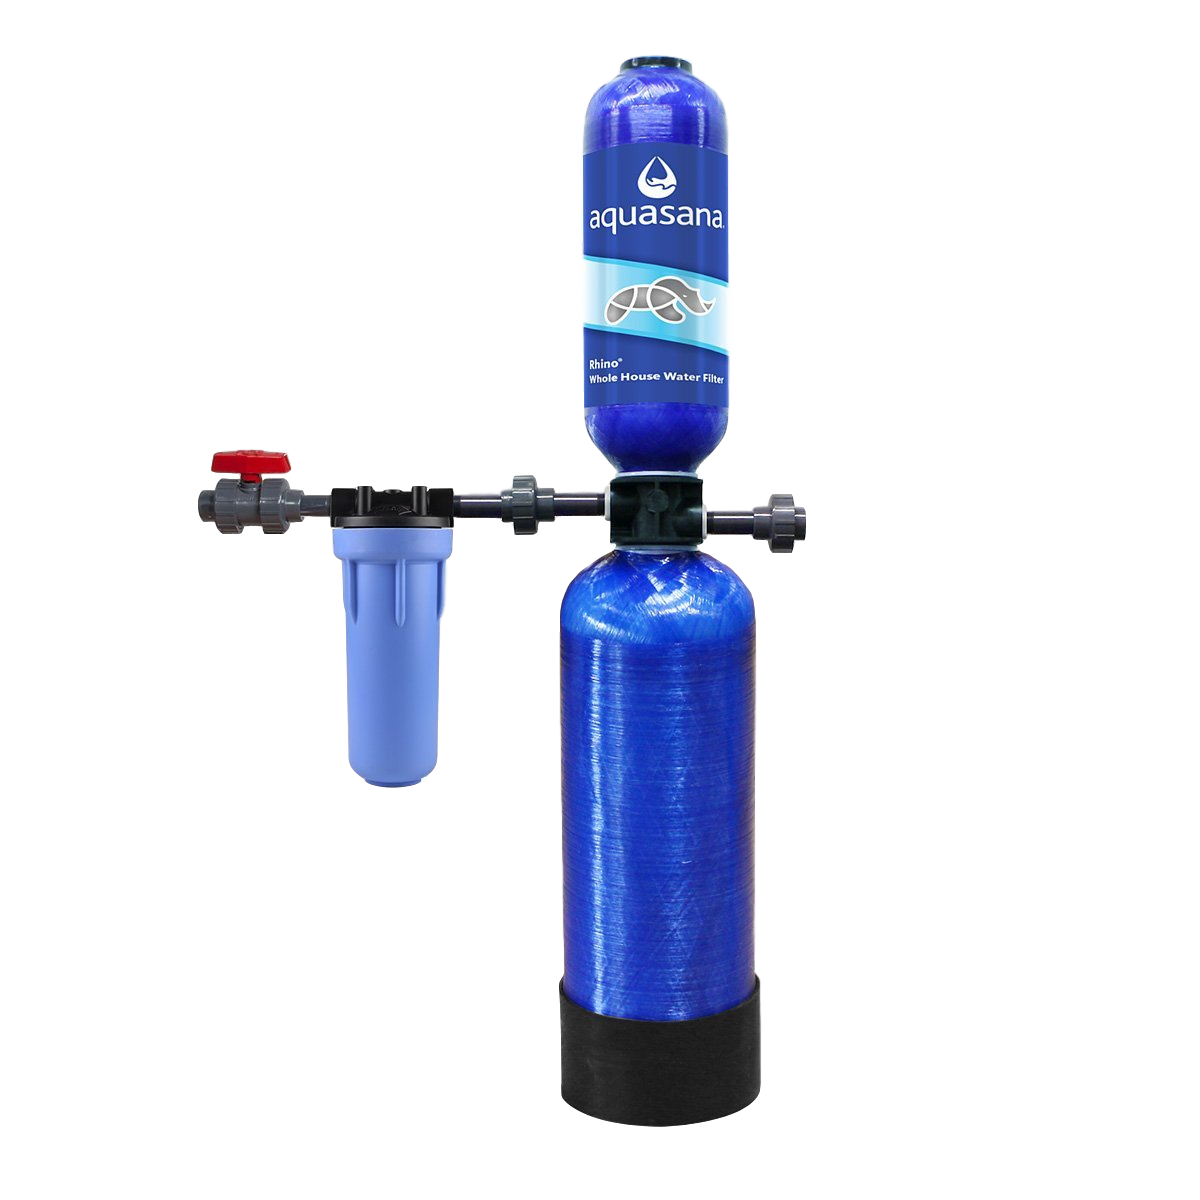 3 Best Aquasana Water Softeners - Our 2018 Product Reviews